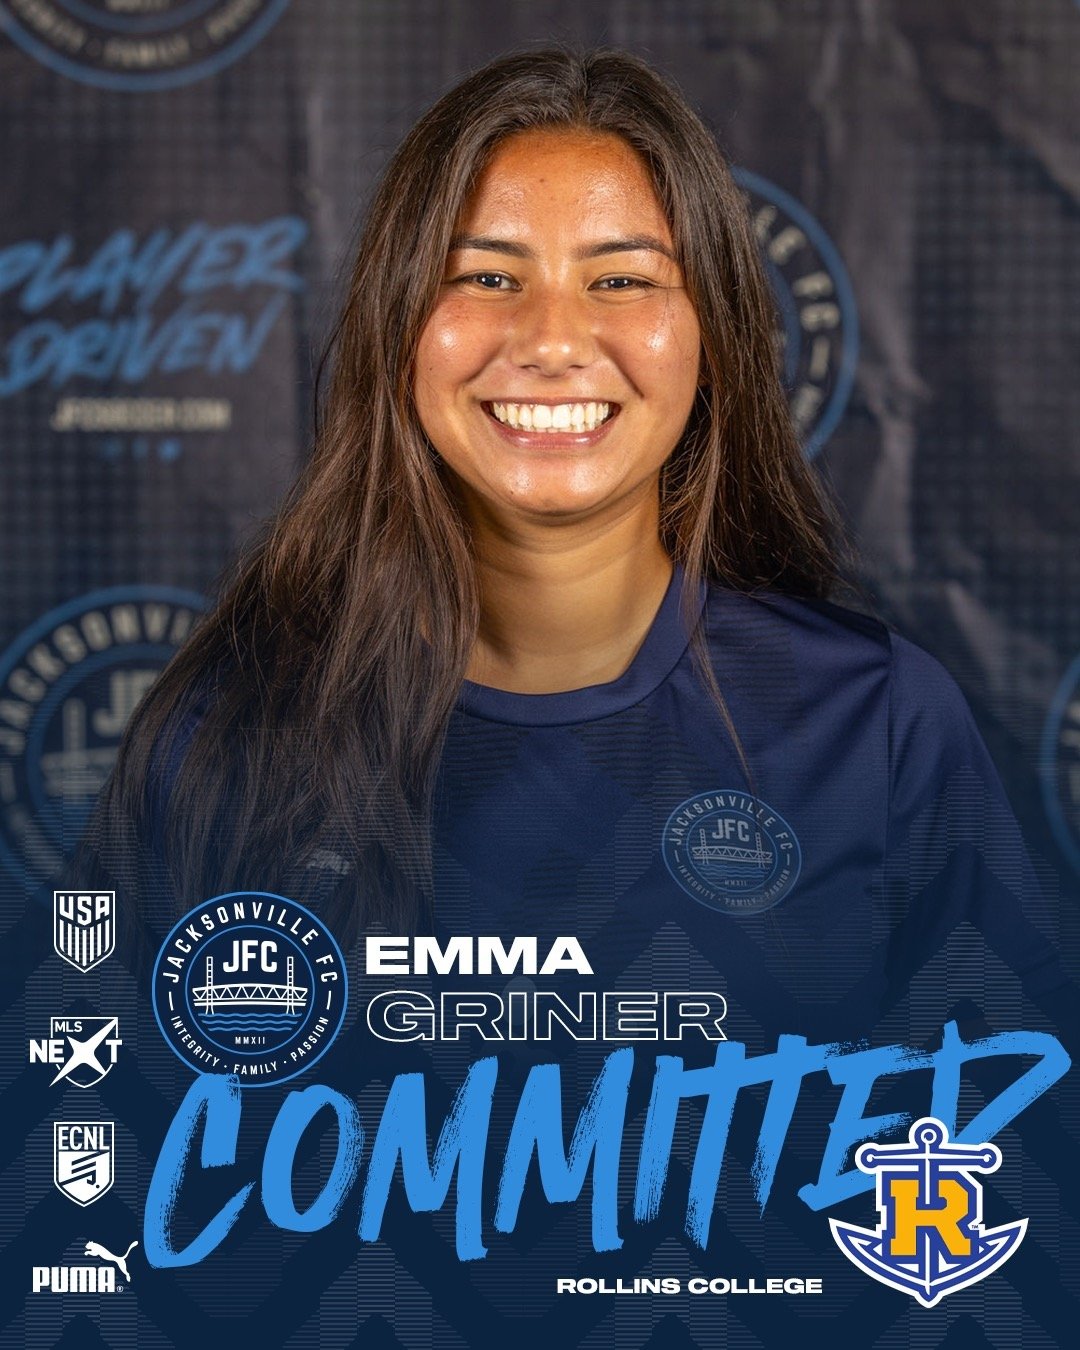 Huge congrats to Emma Griner for her commitment to play college soccer at Rollins College! Your dedication and talent have paved the way for this incredible opportunity. We're excited to see you excel on the field and in the classroom at Rollins. Bes